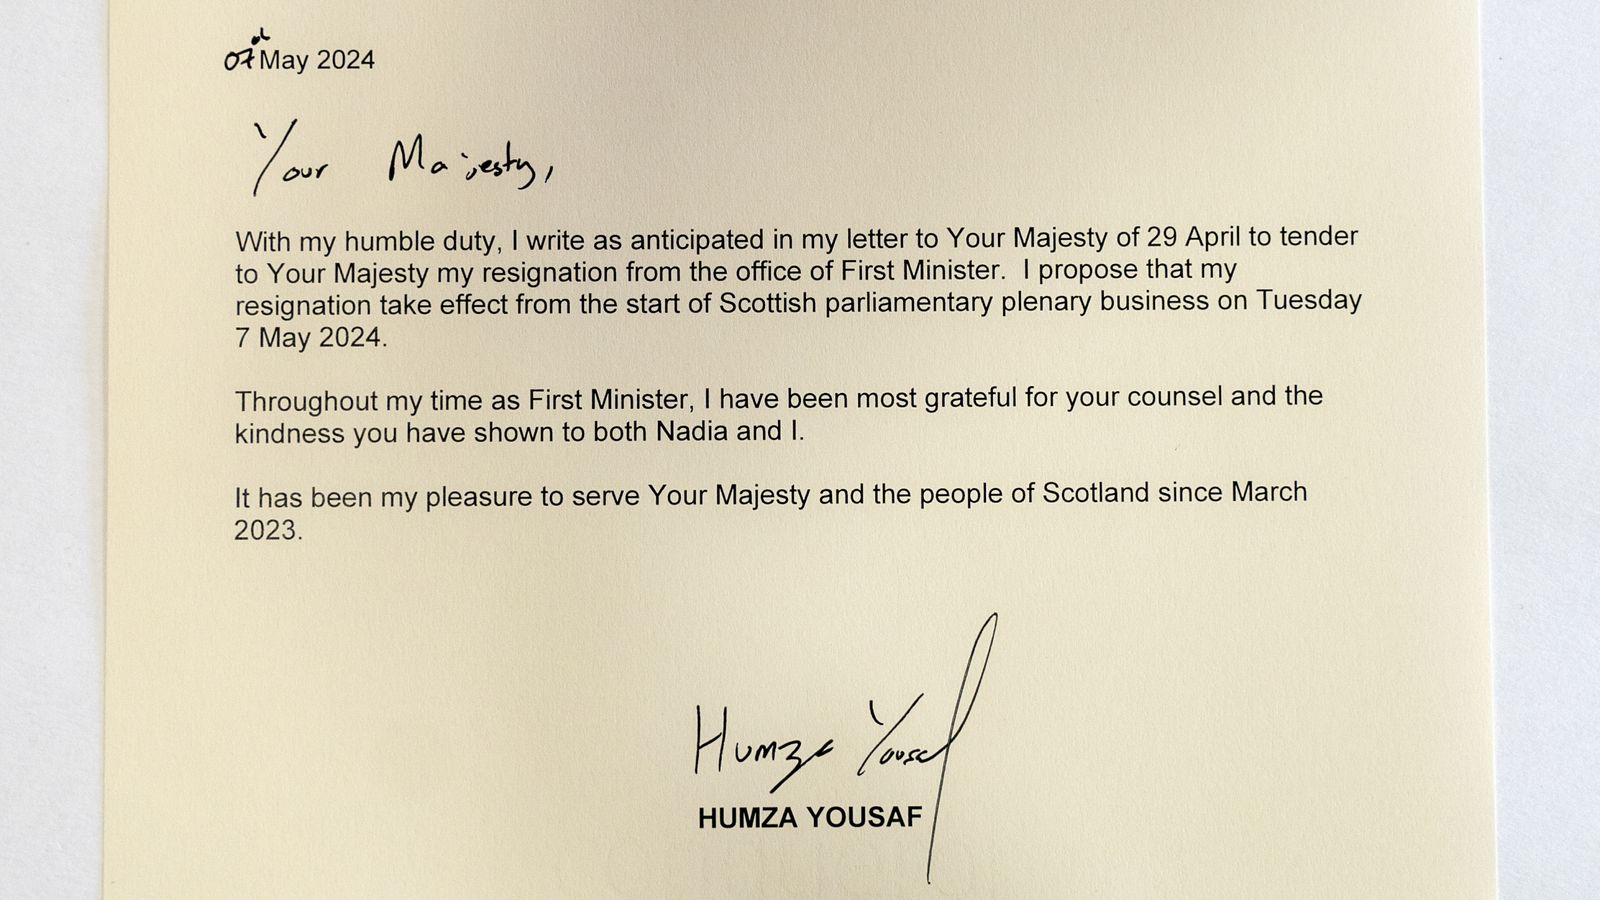 yousaf formally resigns - as swinney set to become scotland's first minister